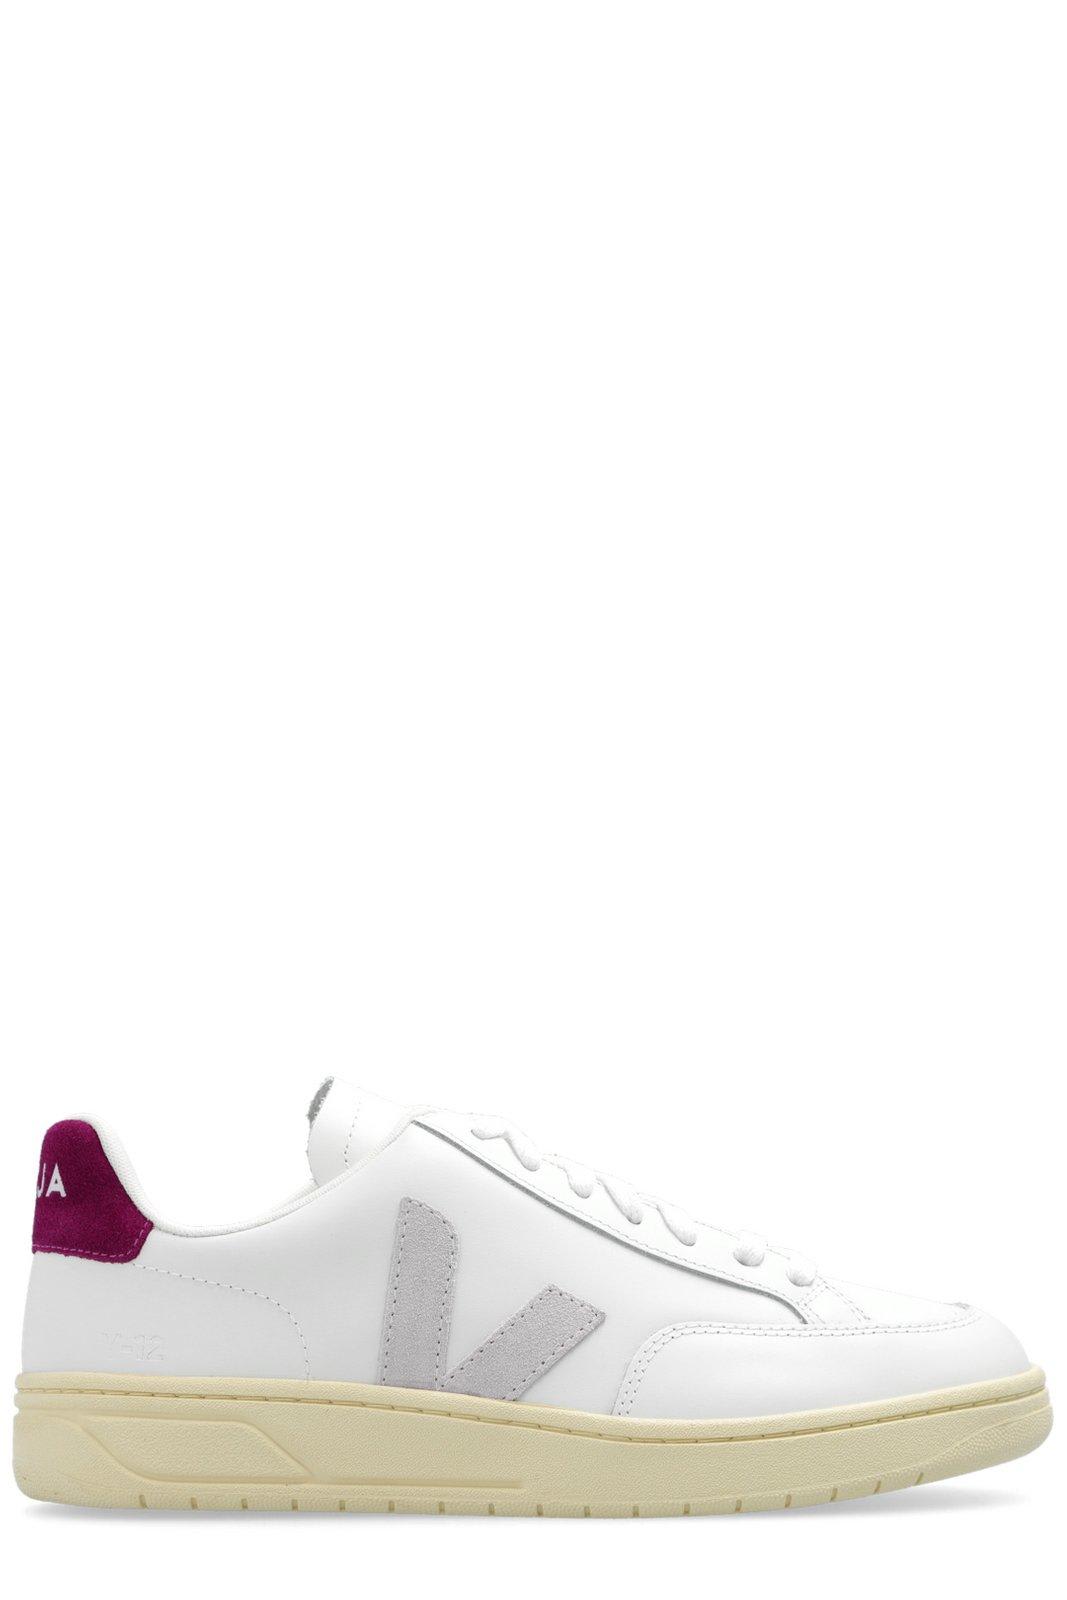 Shop Veja V-12 Low-top Sneakers In Extra White Parme Magenta